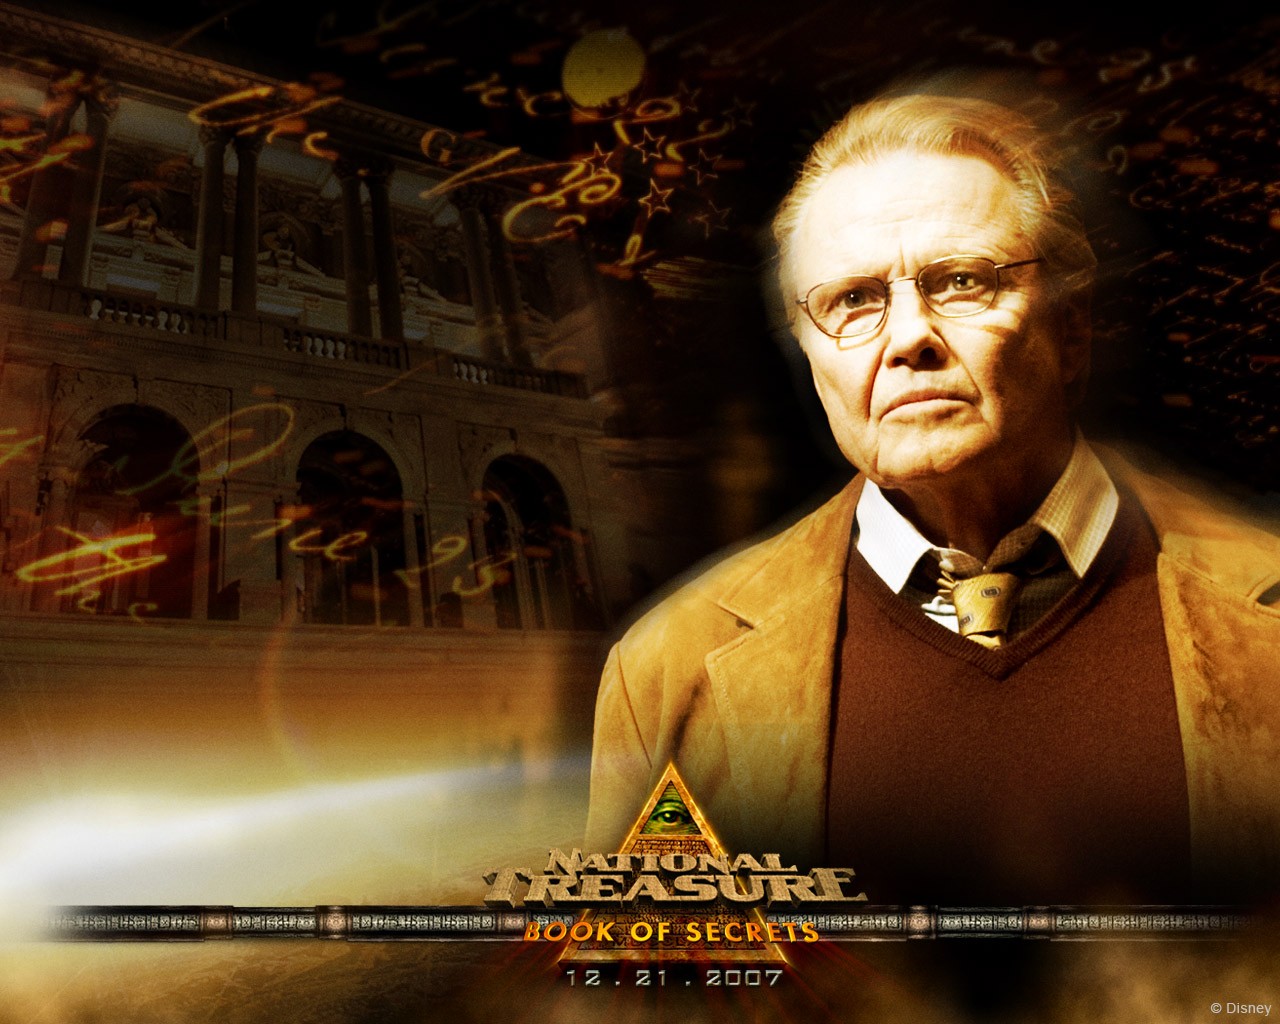 Download High quality National Treasure wallpaper / Movies / 1280x1024